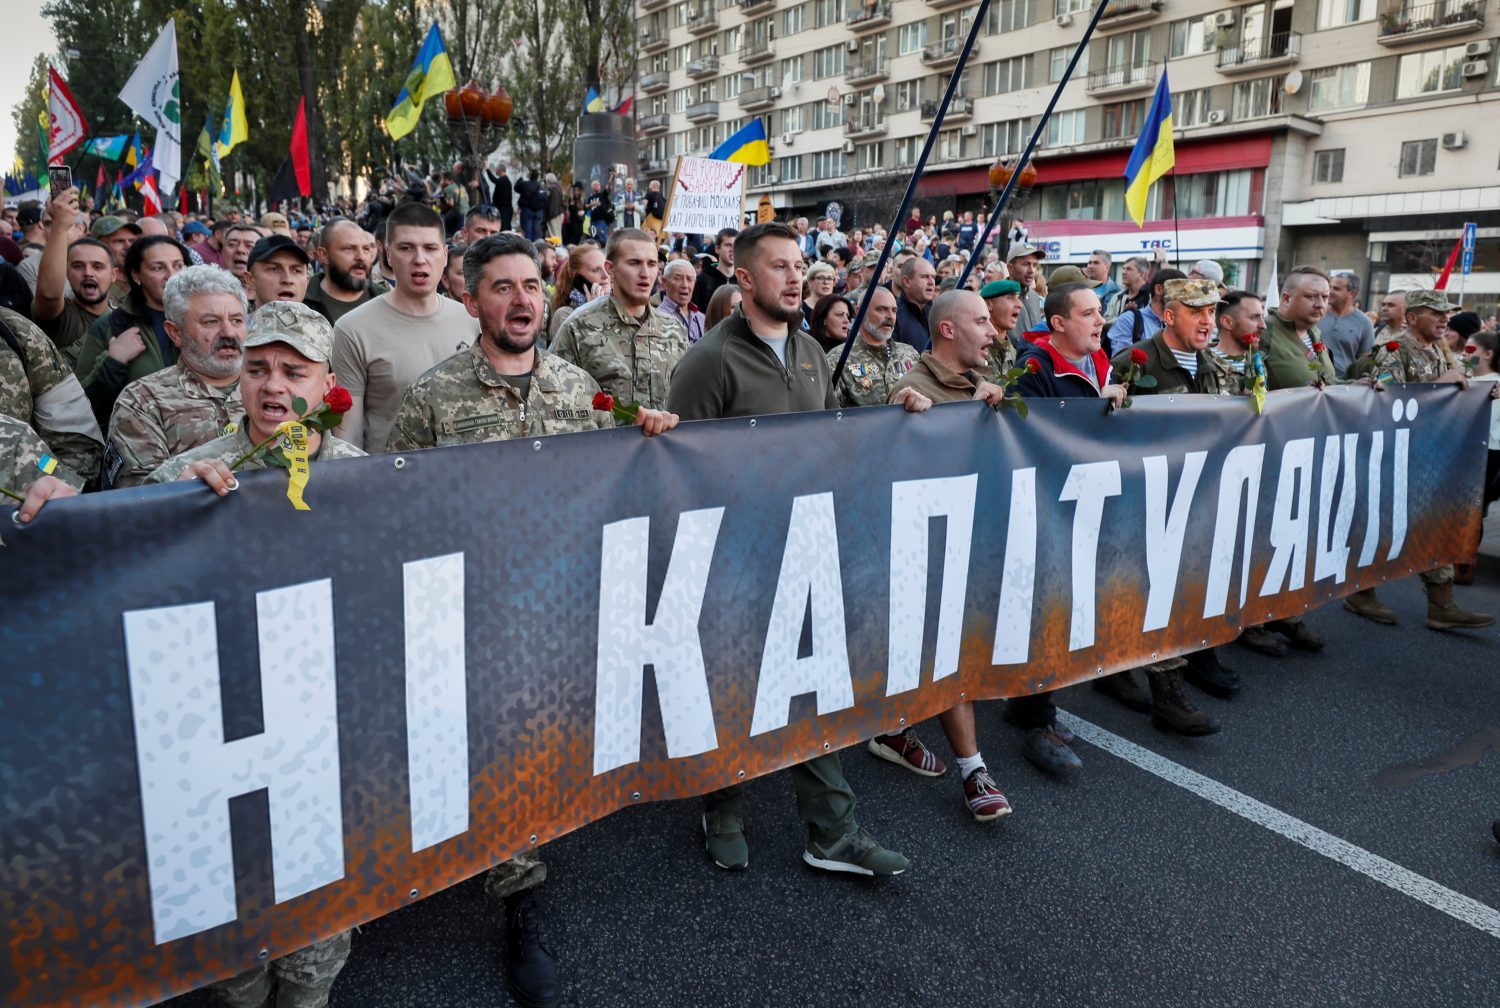 Ukraine faces a decisive December in a rapidly deteriorating geopolitical climate